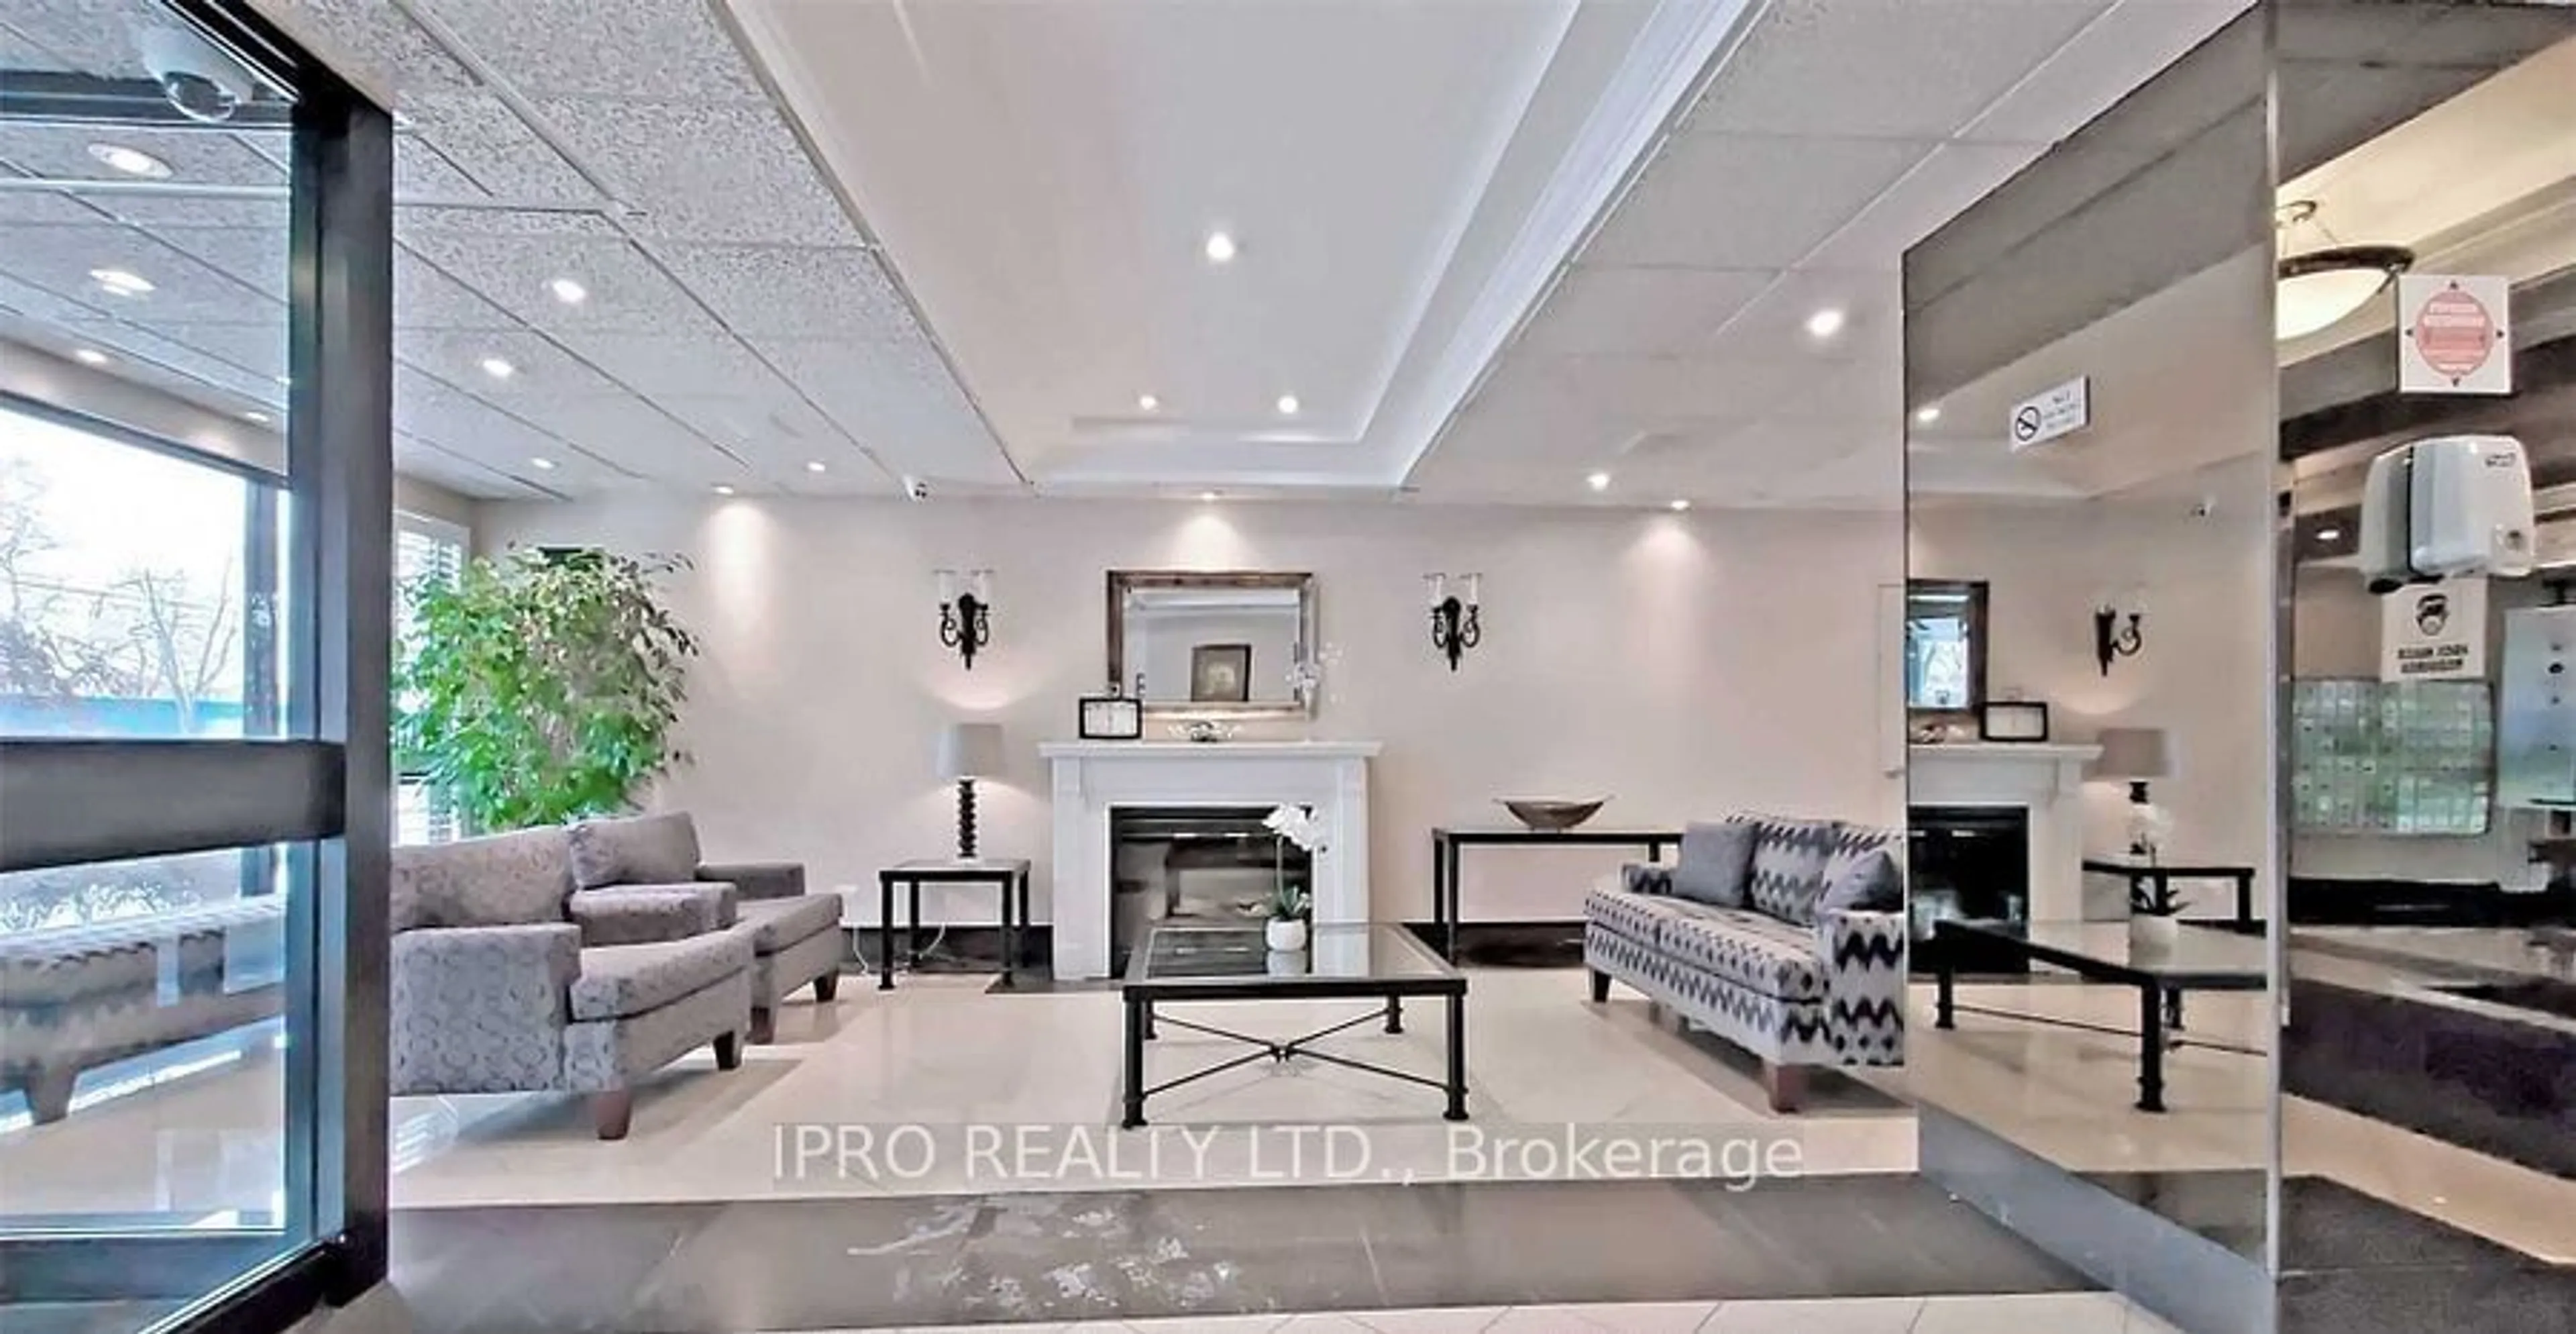 Indoor lobby for 1300 Mississauga Vly Blvd #211, Mississauga Ontario L5A 3S8